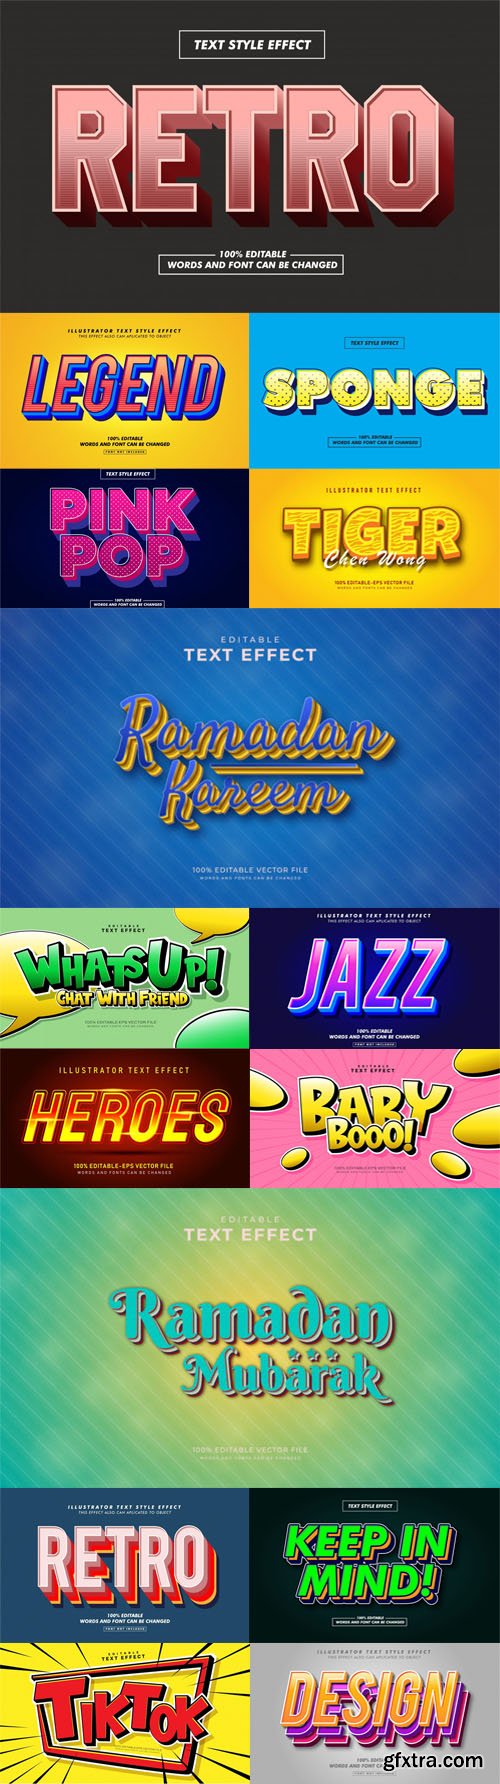 29 Awesome New Text Effects Vector Templates